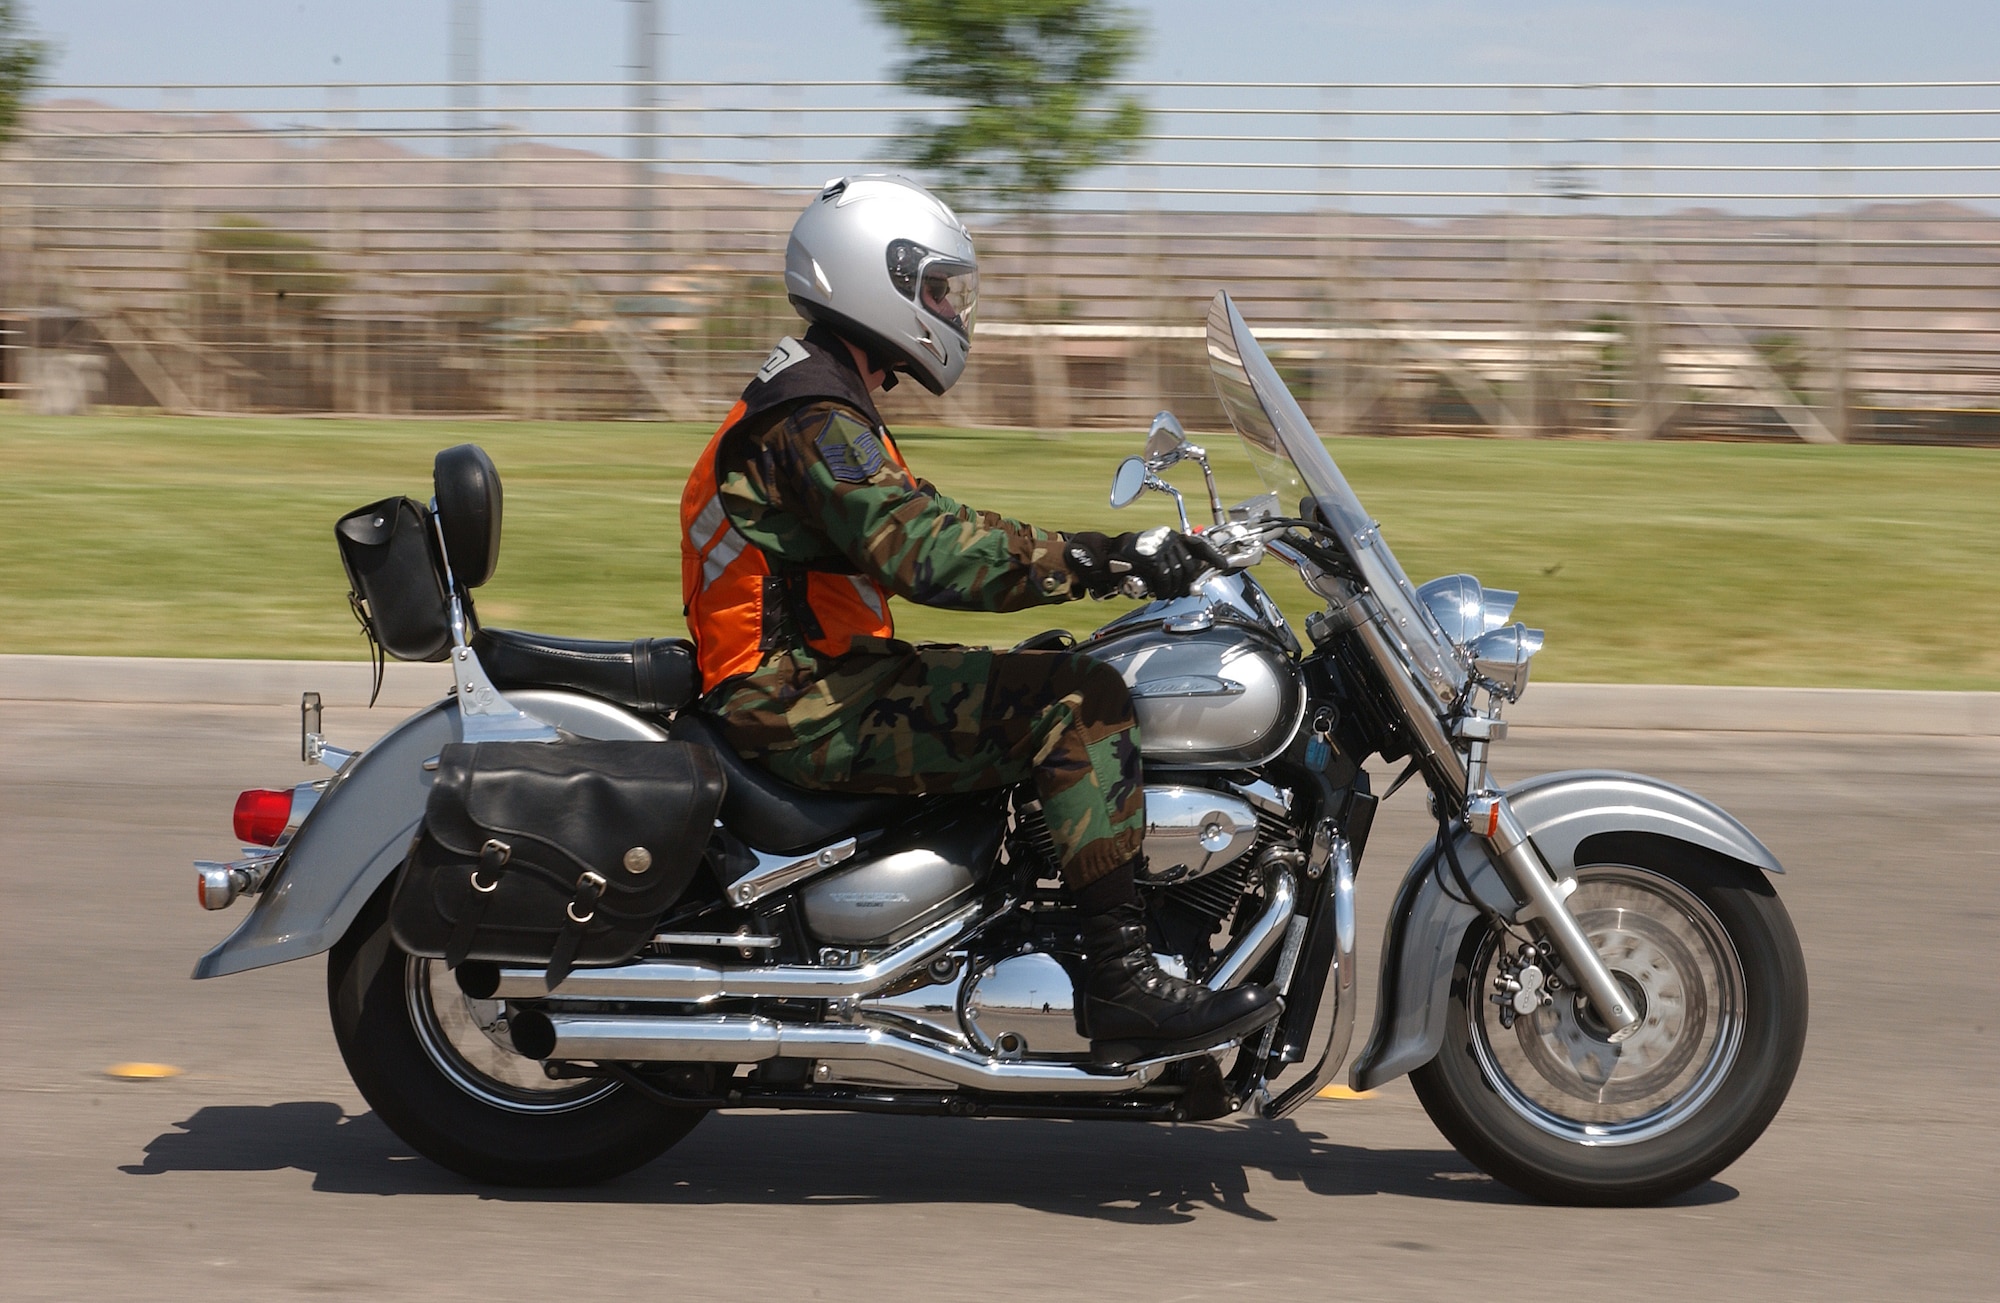 Air Force motorcyclists are required to pass an in-house motorcycle 
safety course before they are permitted to ride.  Nellis offers two motorcycle classes under the Motorcycle Safety Foundation.  The Basic Rider’s Course is a three-day course that teaches the basic fundamentals of riding. The Experienced Rider’s Course is a one-day course designed for riders with six months or more experience.  